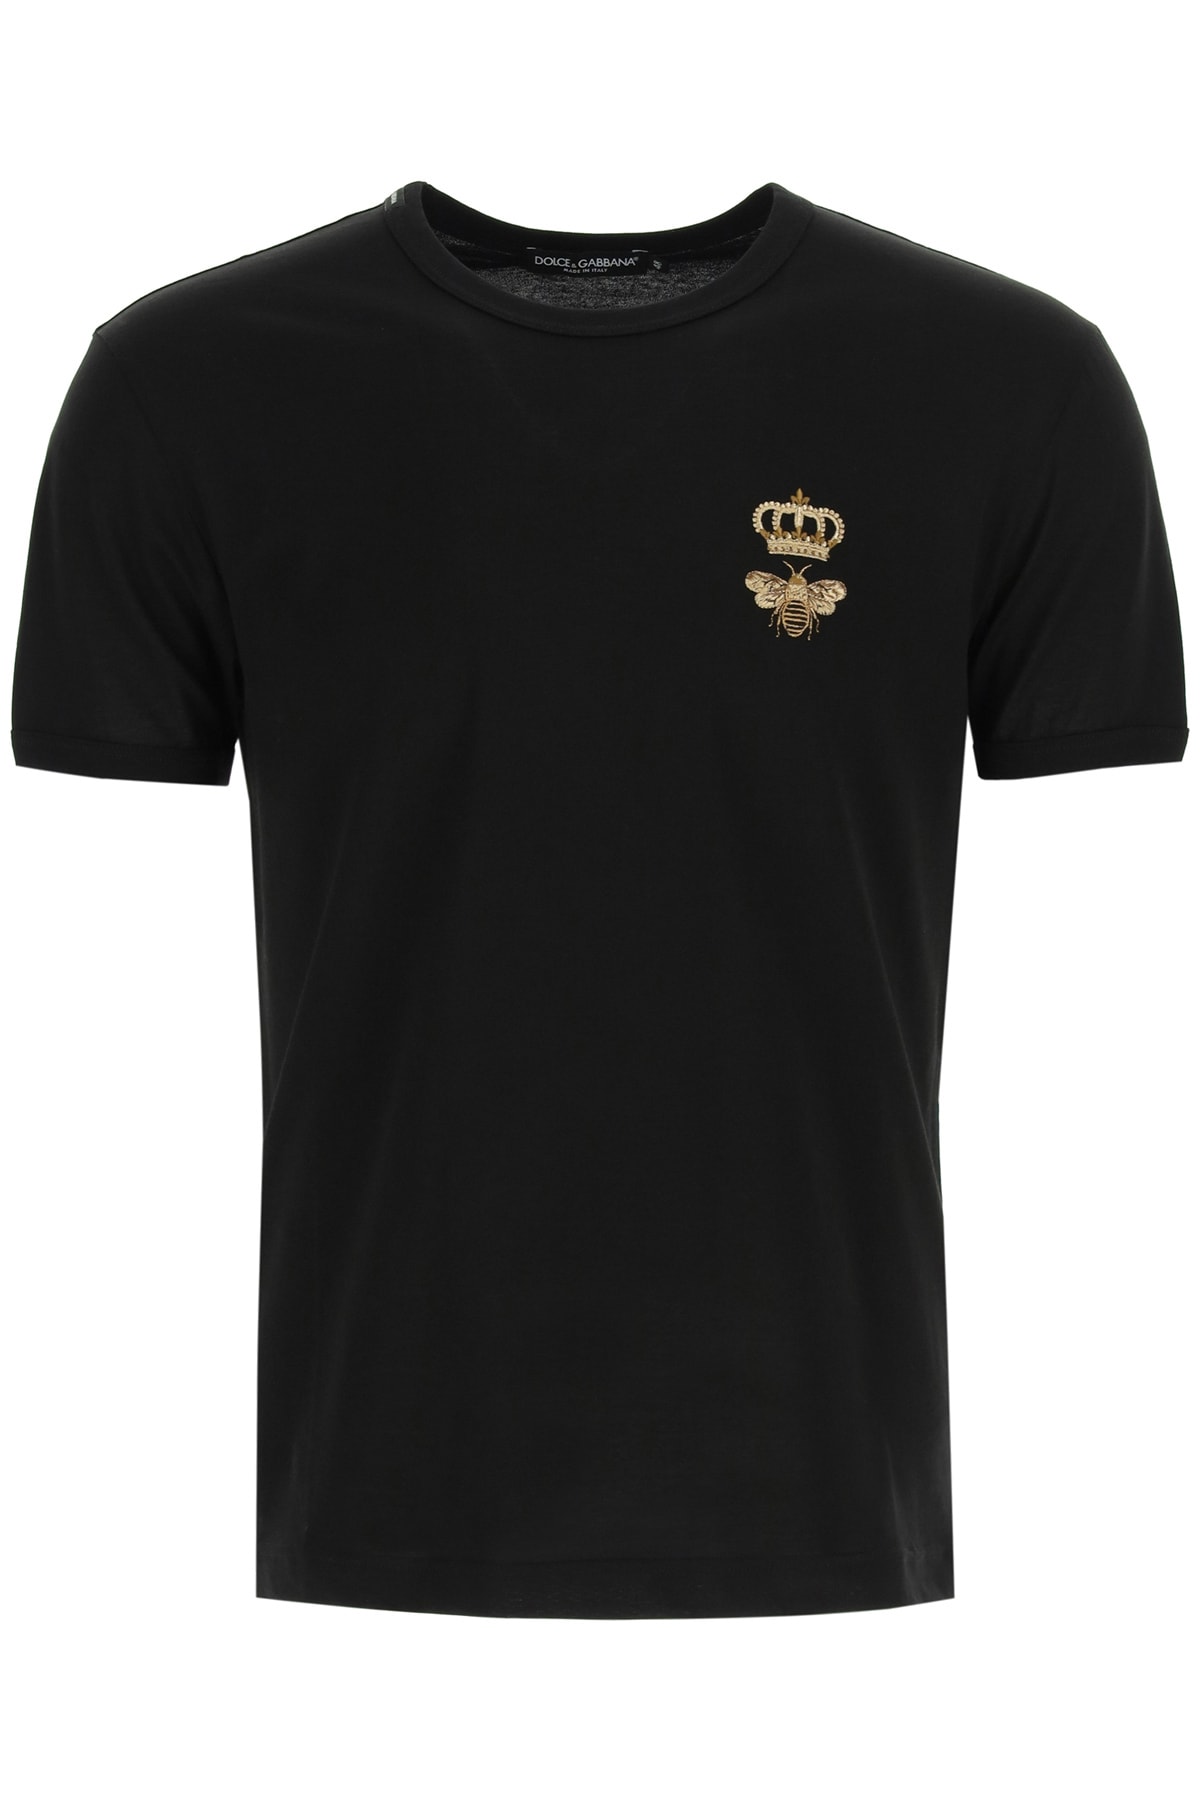 Dolce & Gabbana T-shirt With Bee And Crown Lurex Embroidery